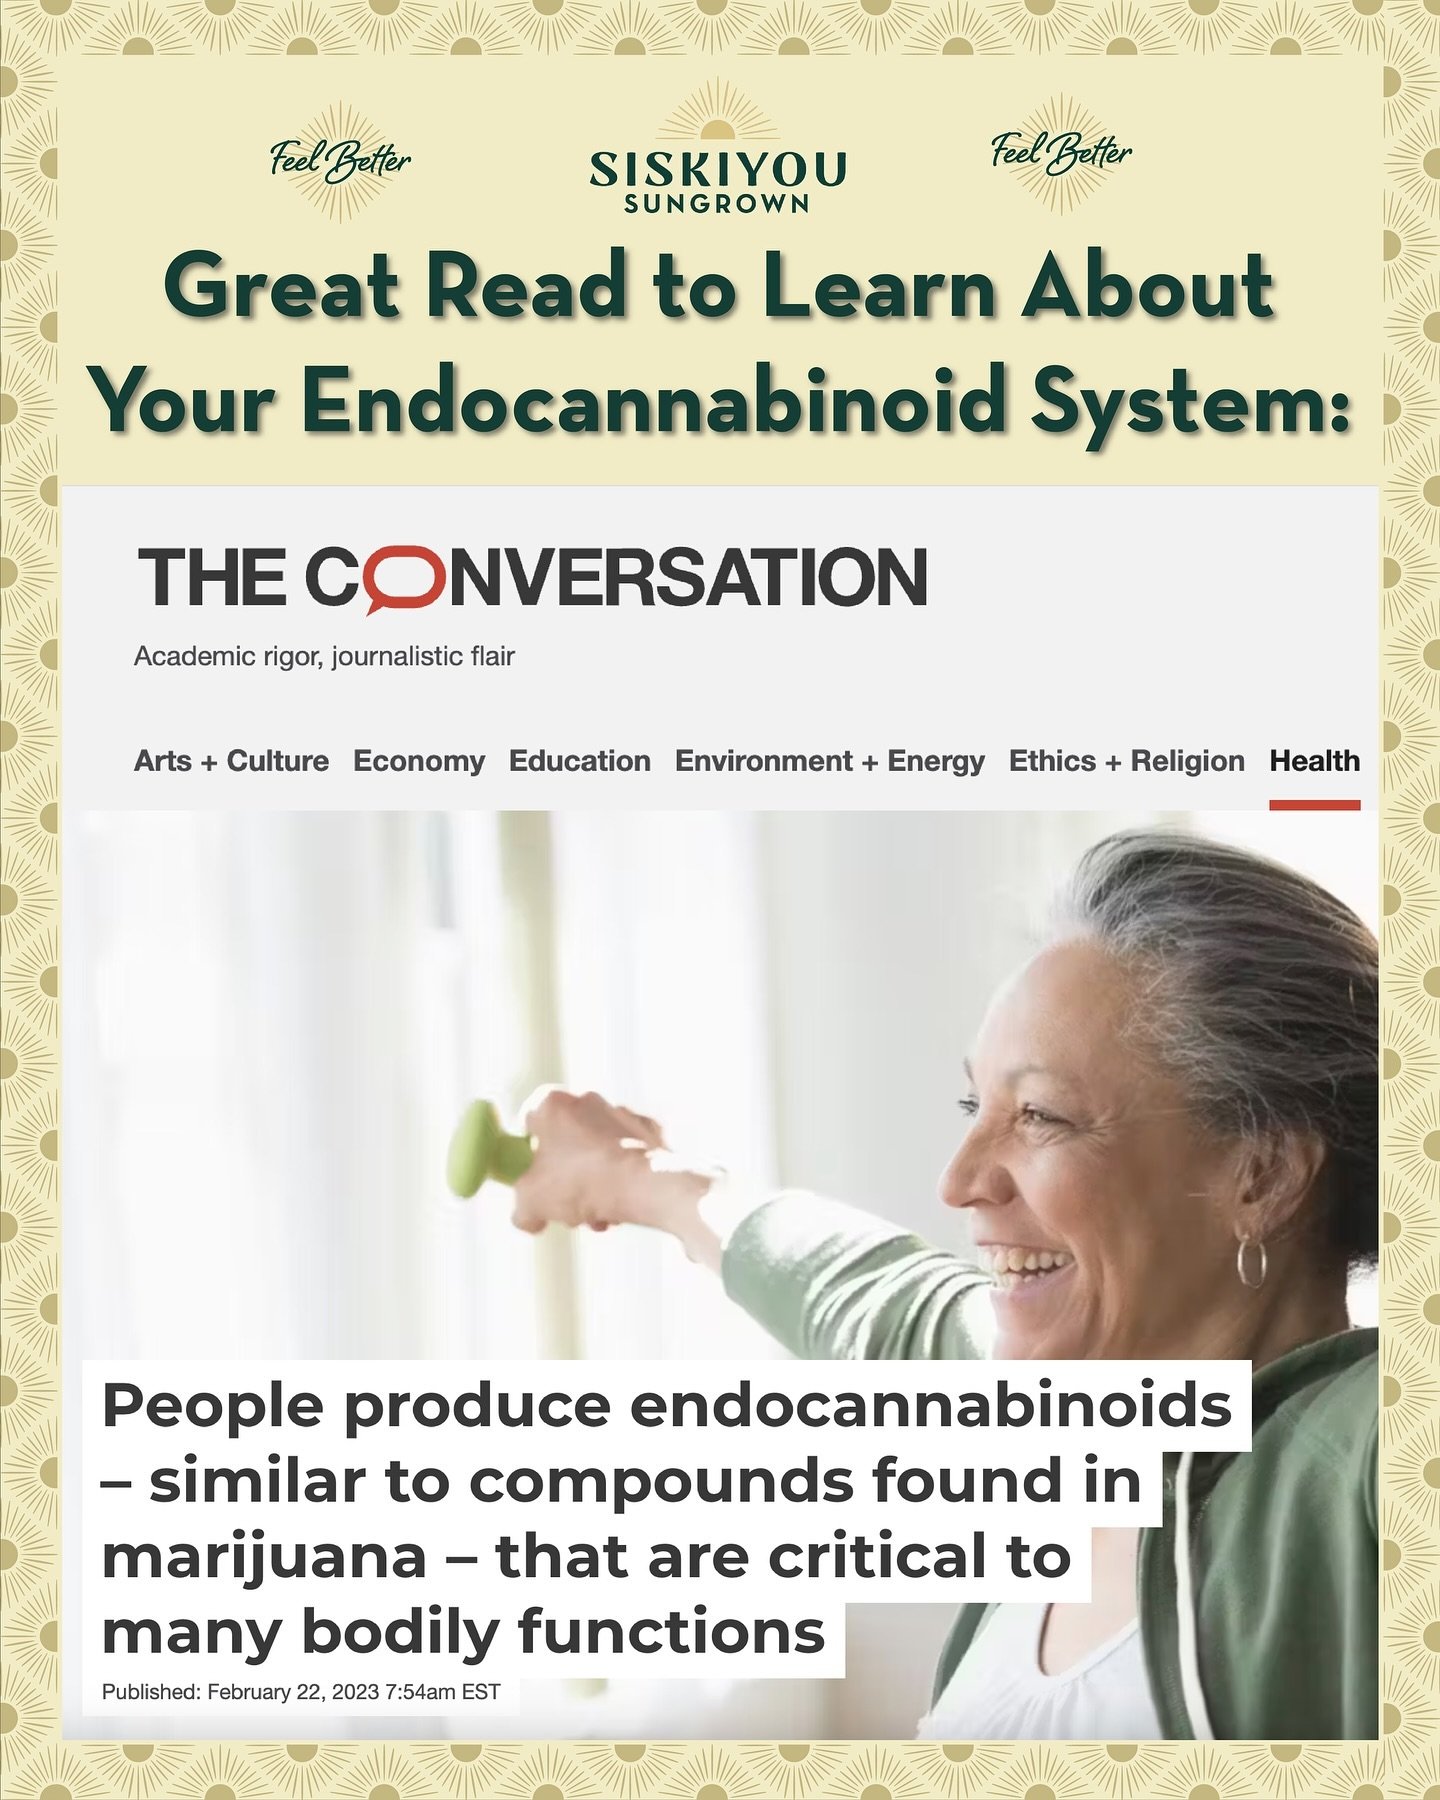 Read this great article in The Conversation to learn more about how the phytocannabinoids in the cannabis plant interact with our bodies&rsquo; own endocannabinoid system to produce therapeutic activity:

https://theconversation.com/people-produce-en